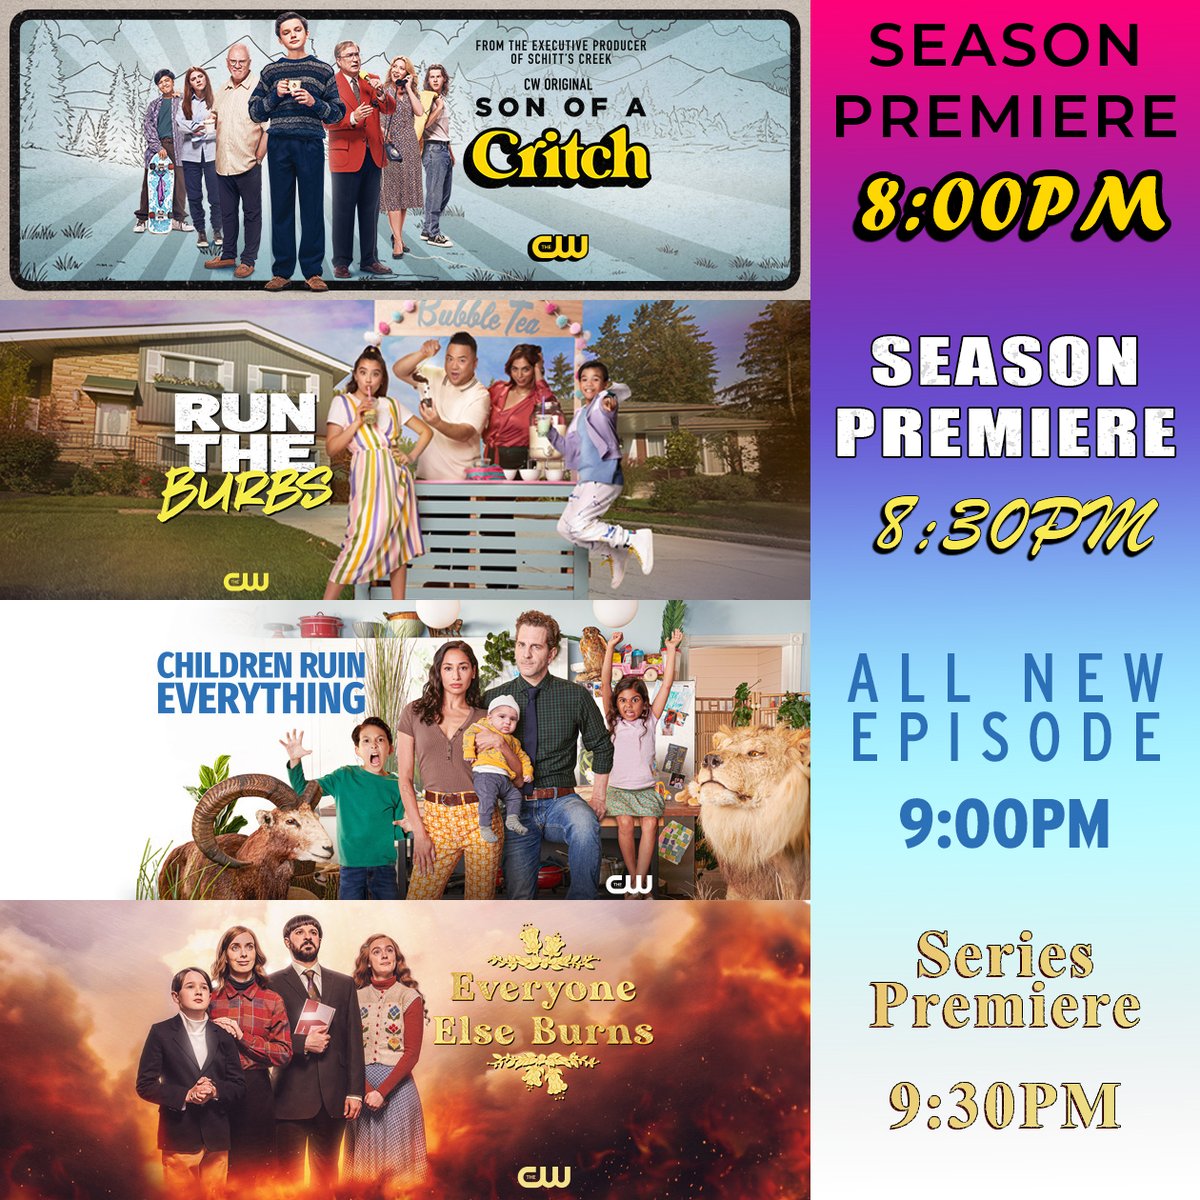 WHOA! ALL NEW TONIGHT! 2 season premieres, 1 series premiere, and 1 brand new episode all in 1 night?! You gotta see this! #SonOfACritch, #RunTheBurbs, #ChildrenRuinEverything and #EveryoneElseBurns brighten up your night starting at 8pm right here on the #TriadCW!